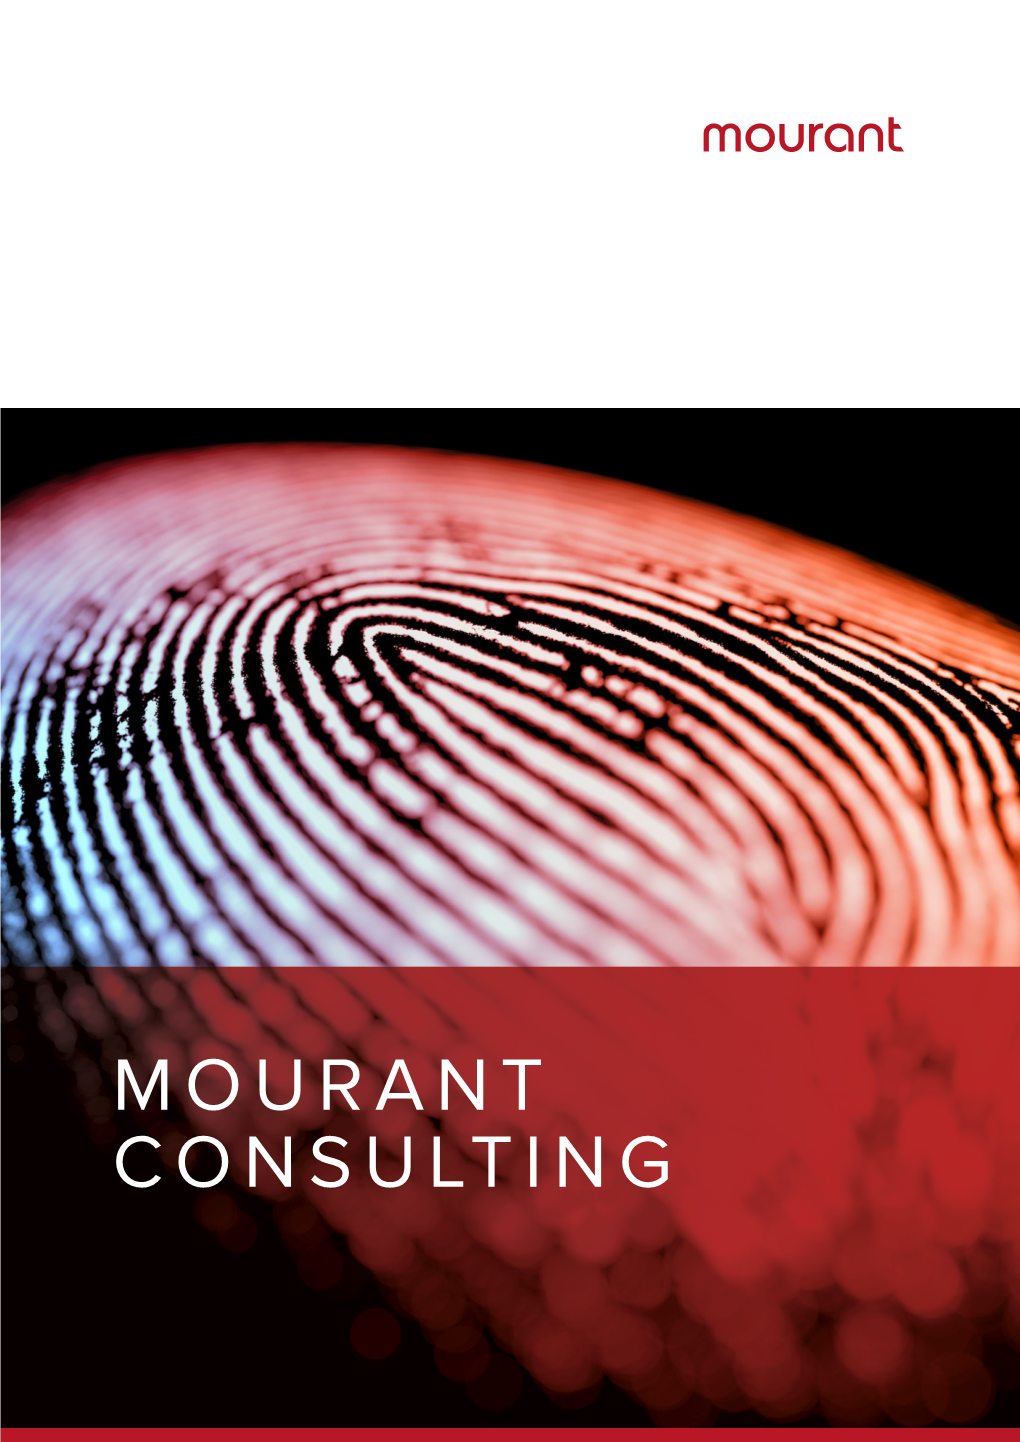 MOURANT CONSULTING Global Specialist Consulting